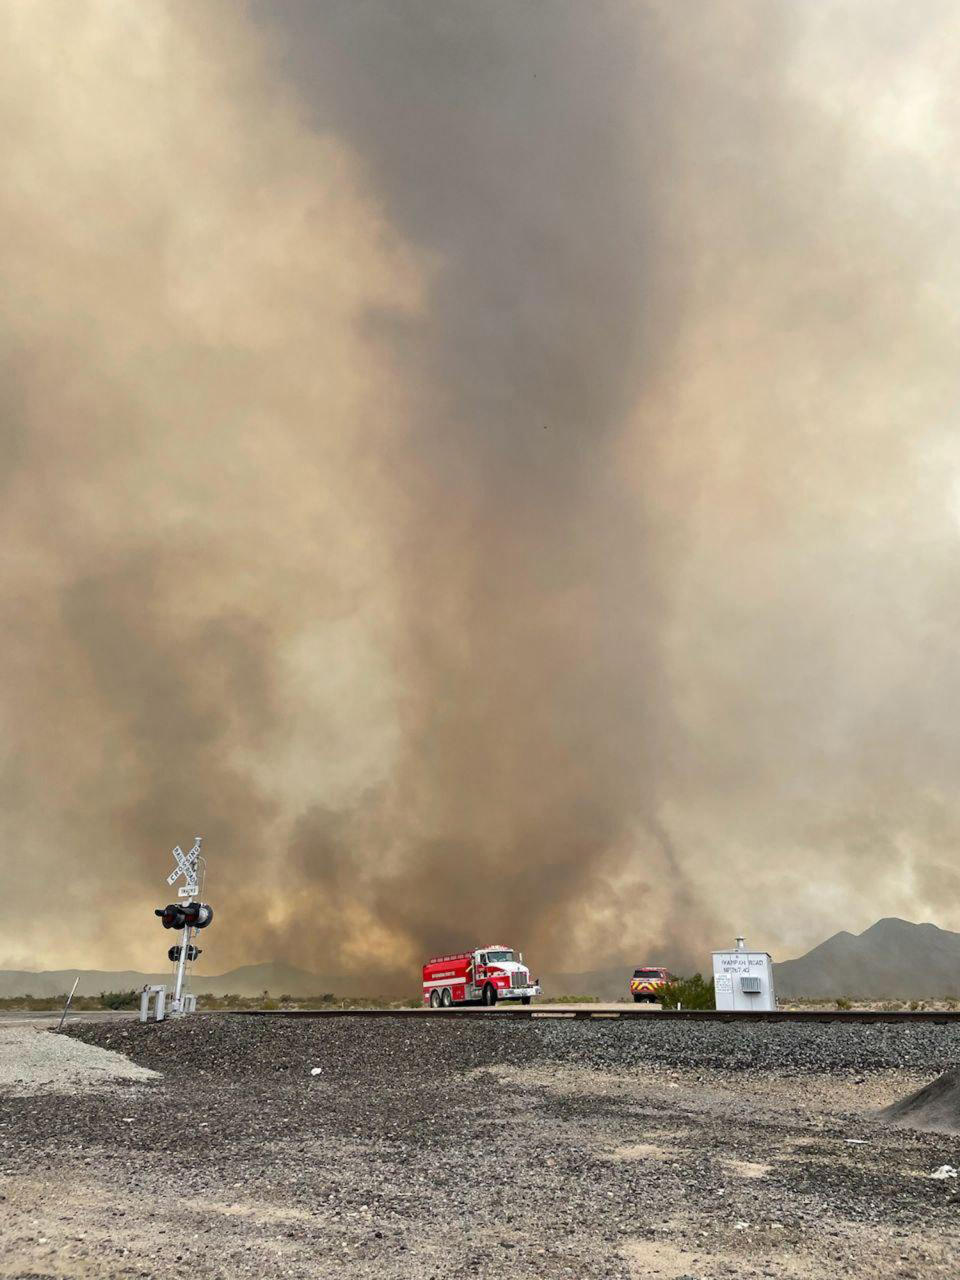 In this photo provided by the National Park Service, smoke rises from the York Fire in the Mojave National Preserve, Calif., Sunday, July 30, 2023. A massive wildfire burning out of control in California's Mojave National Preserve was spreading rapidly amid erratic winds, while firefighters reported progress against another major blaze to the southwest that prompted evacuations. (National Park Service via AP)